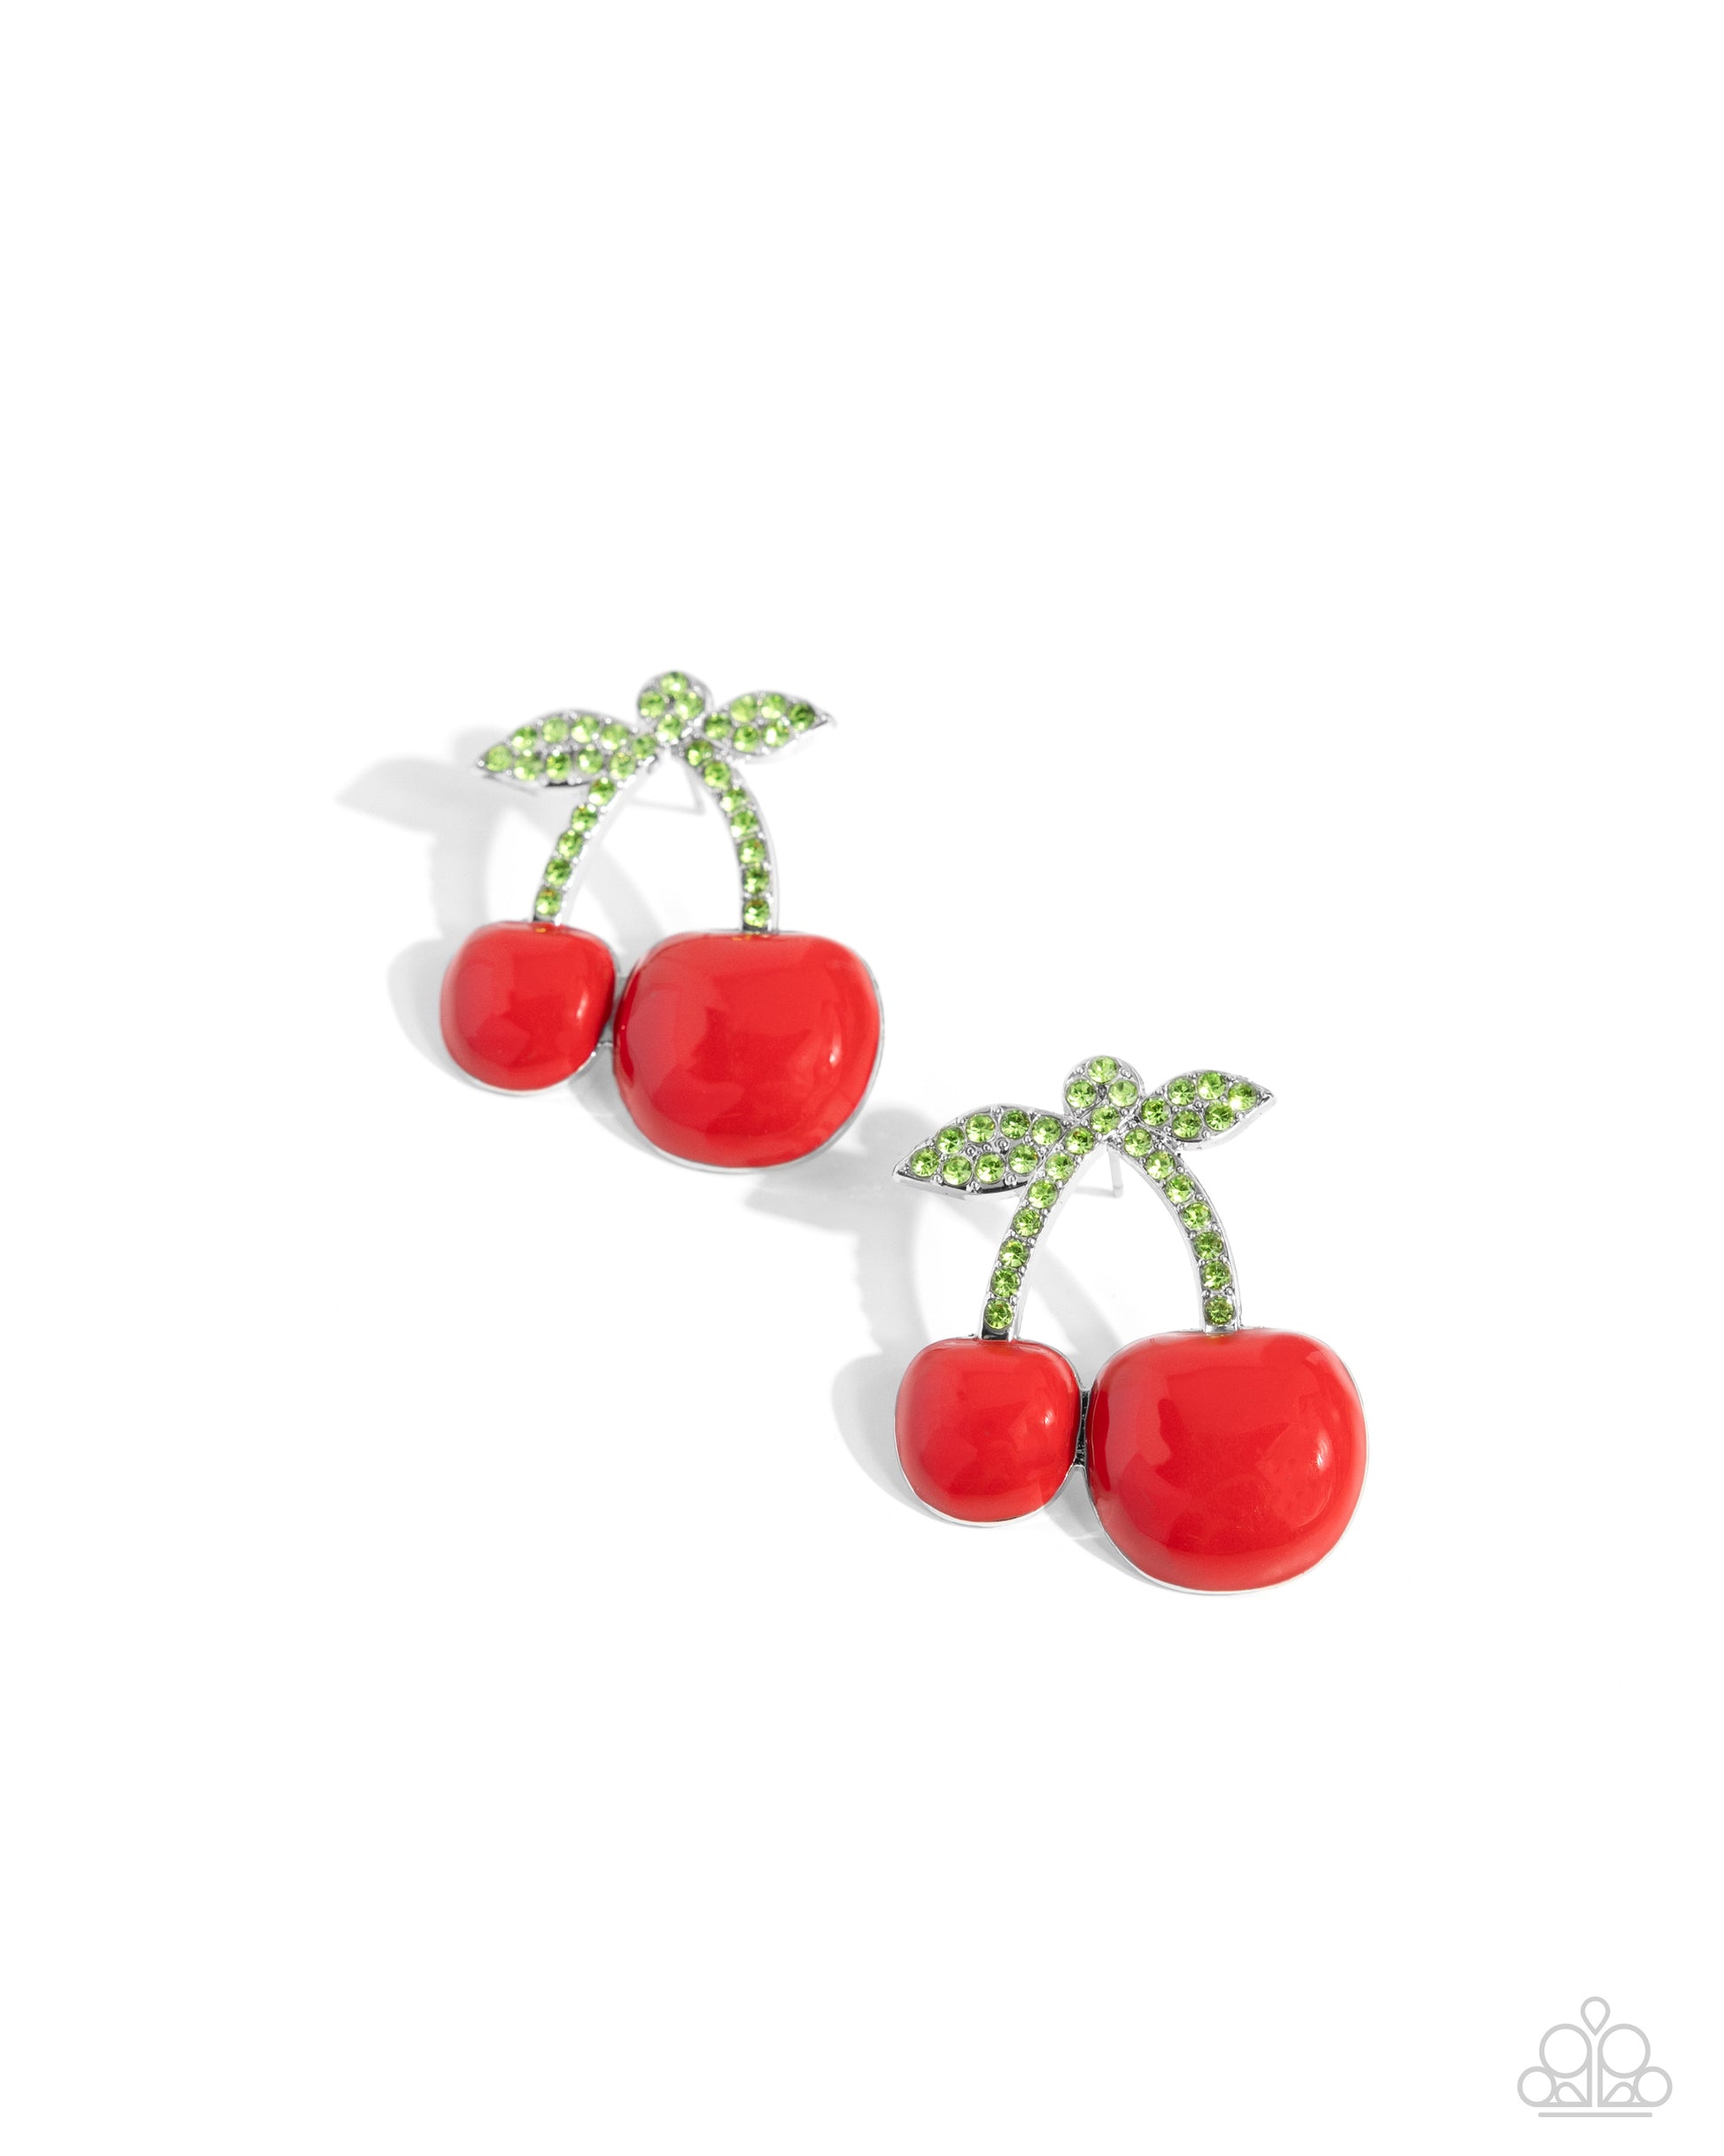 Charming Cherries Red Post Earring - Paparazzi Accessories  Embellished in light green rhinestones, silver stems featuring a vibrant duo of red cherries in varying sizes hang below the ear for a fantastic fruity display. Earring attaches to a standard post fitting.  Sold as one pair of post earrings.  SKU: P5PO-RDXX-064XX